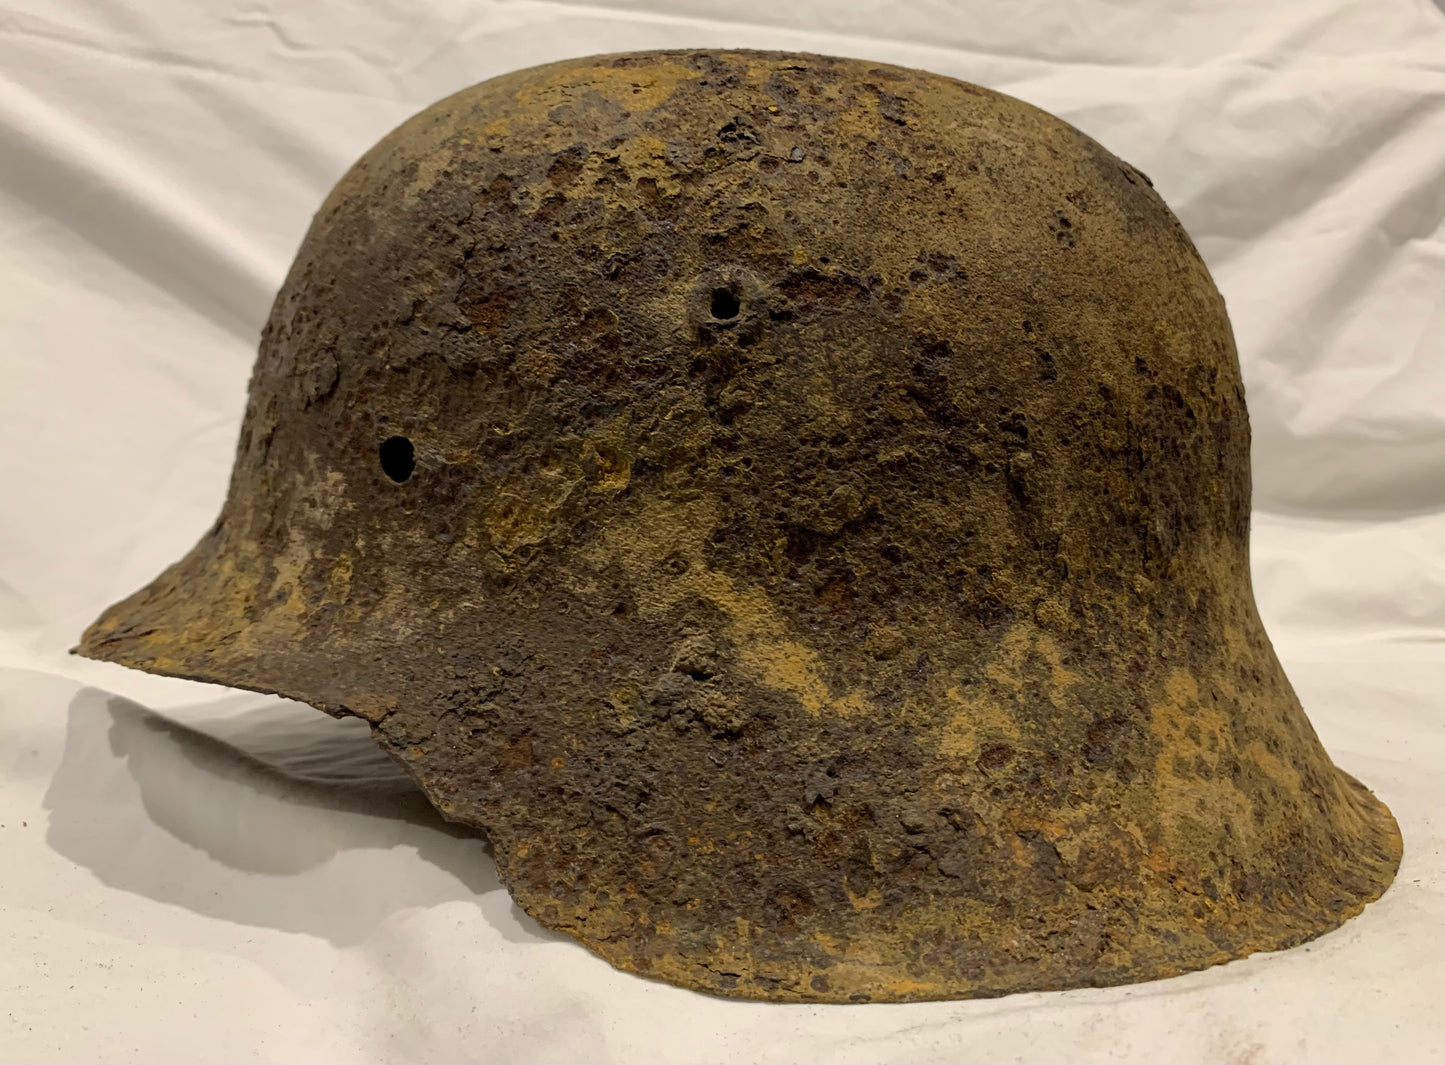 WW2 German M42 Winter Camouflage Helmet from the Eastern Front.